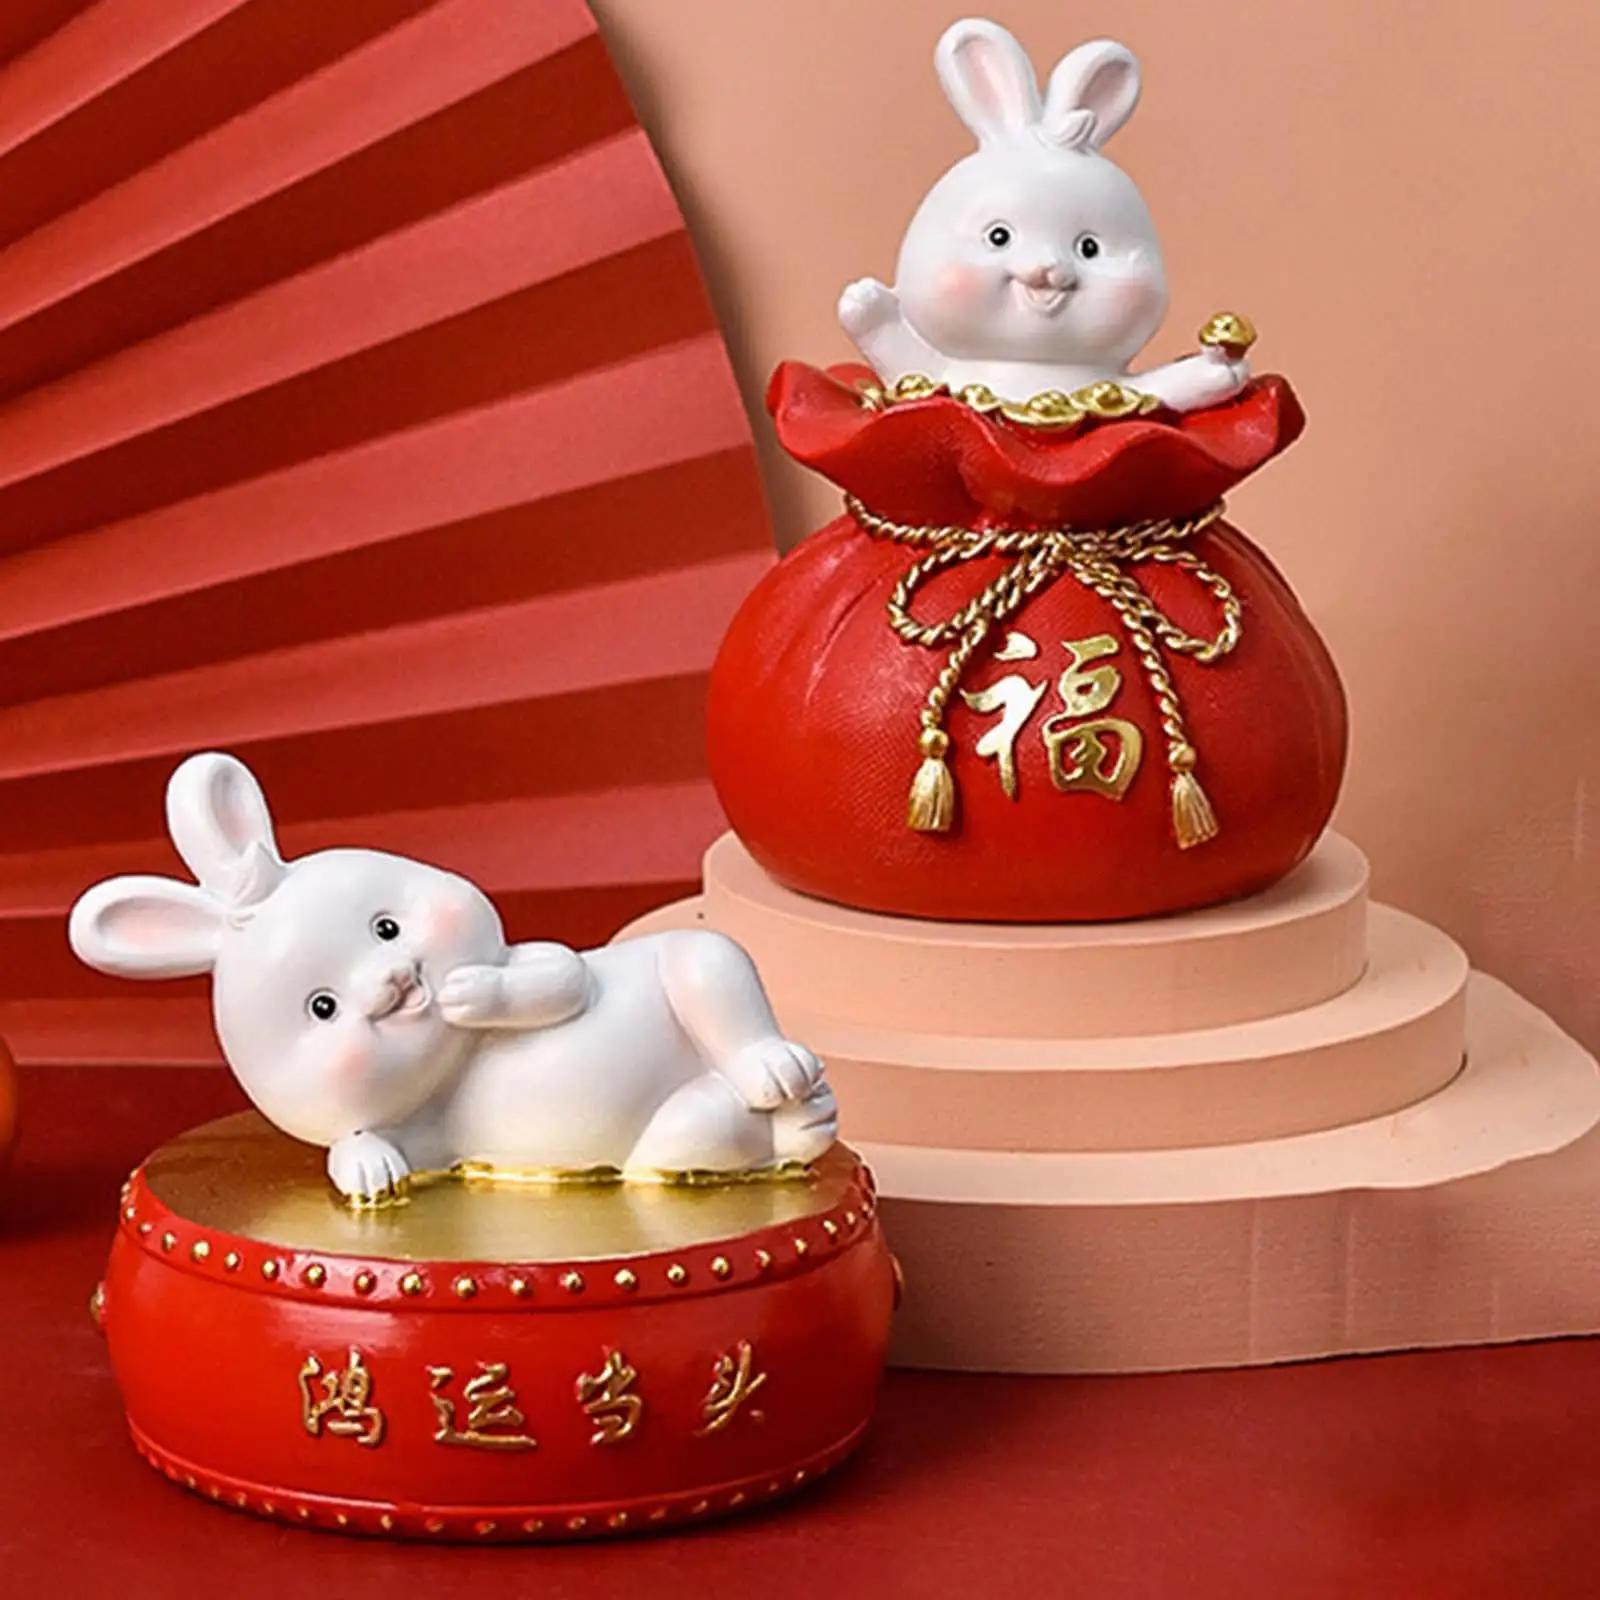 Lucky Statue Money Box Figurines Piggy Bank Storage Case for Bedroom